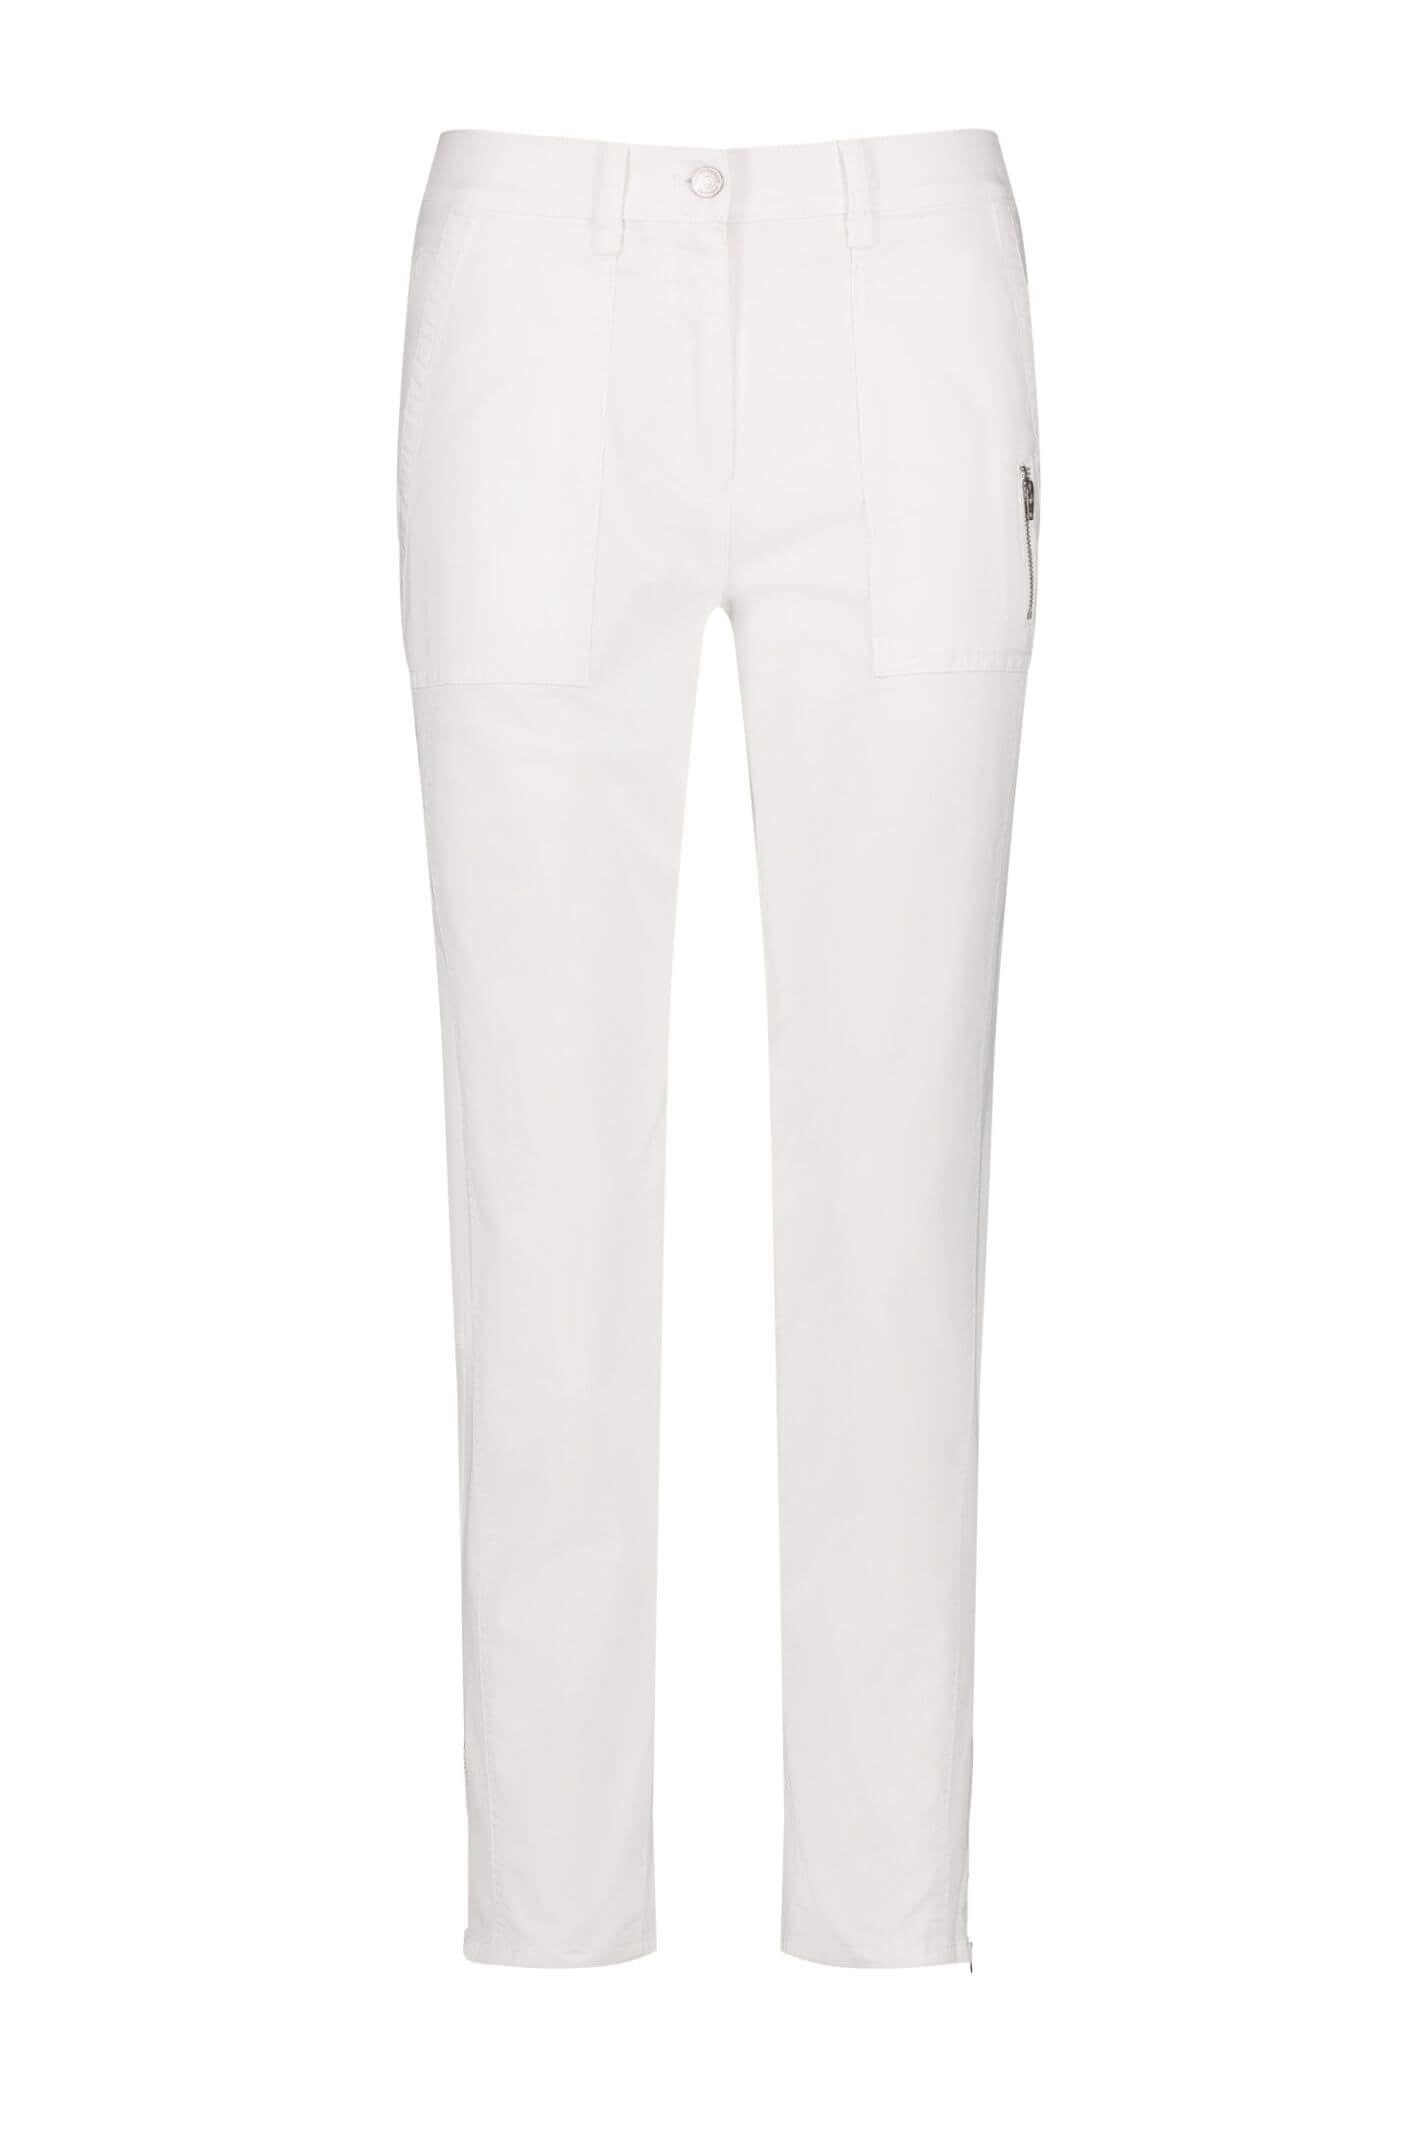 Gerry Weber 822038 White Chino Trousers – Experience